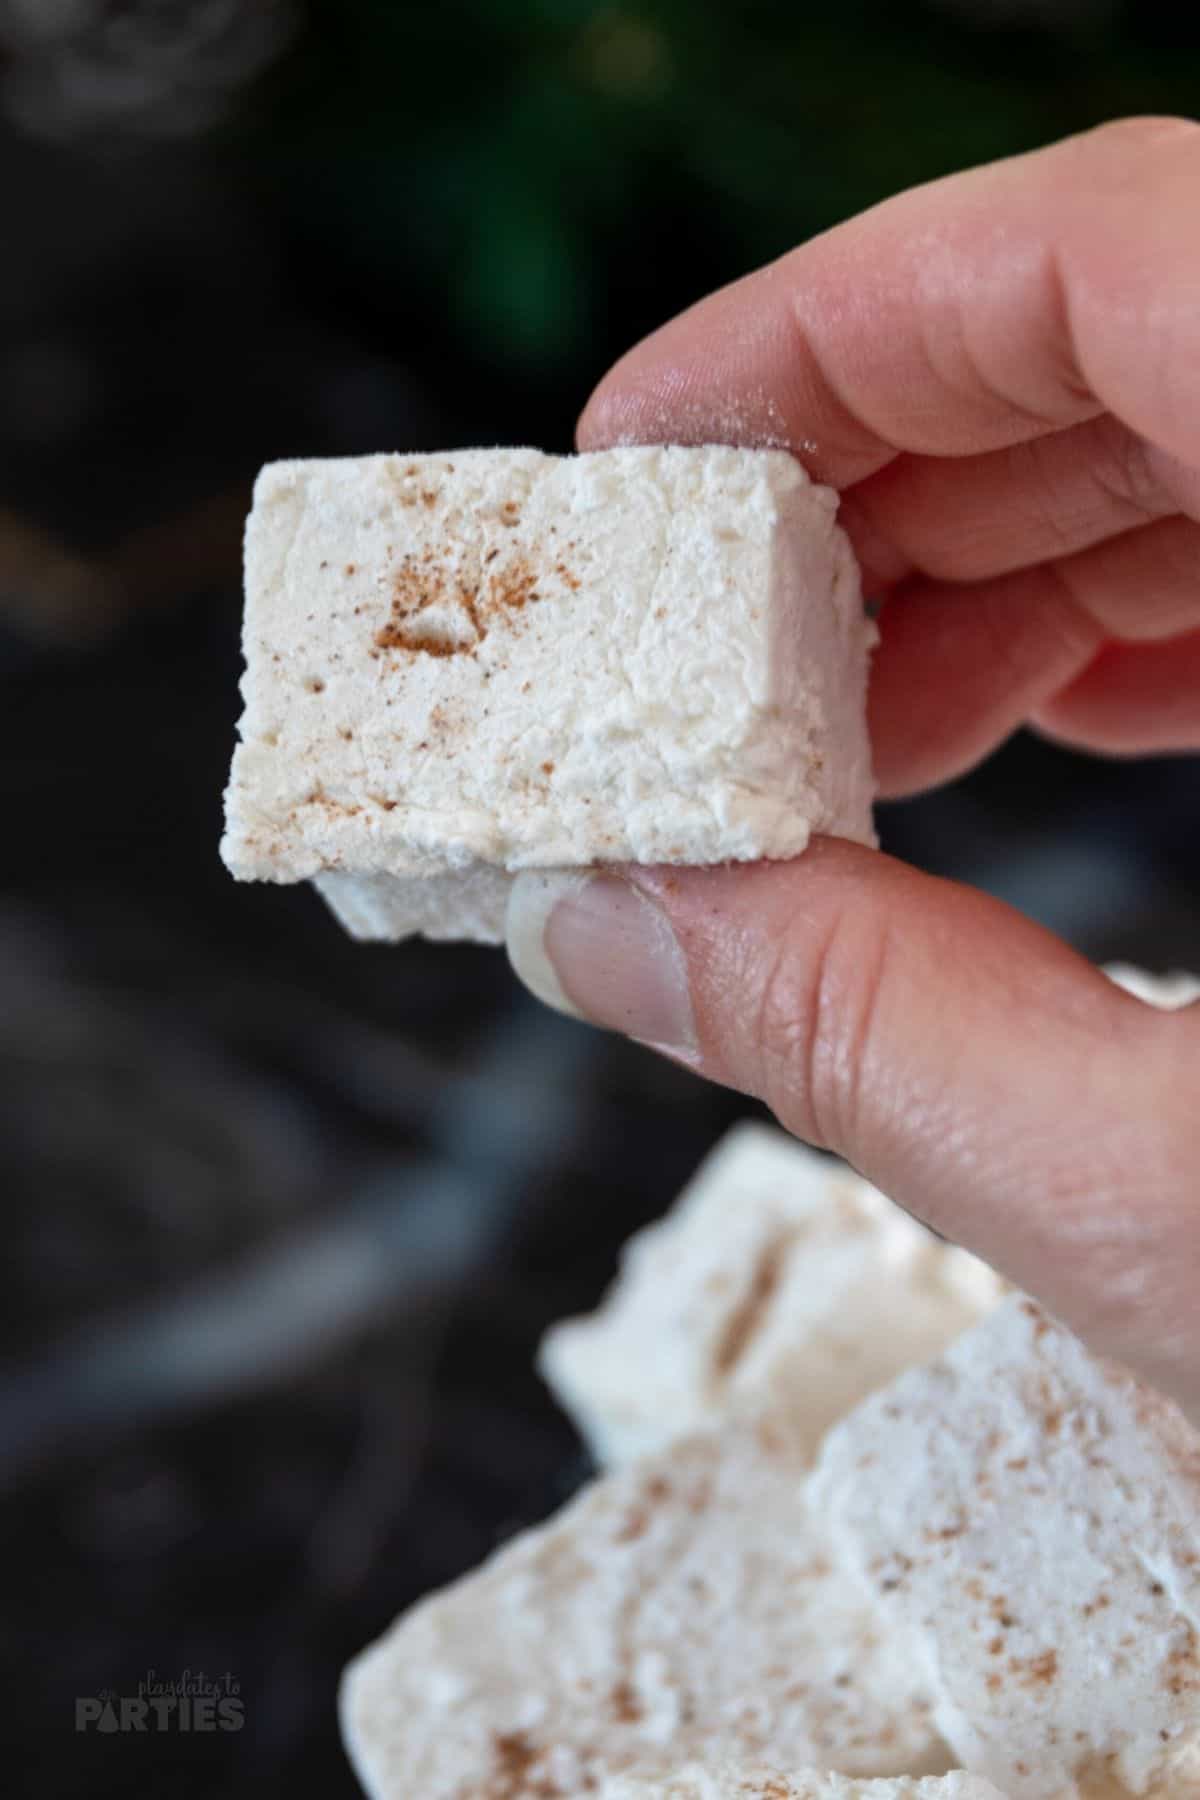 A woman's hand holding an eggnog marshmallow for Christmas.